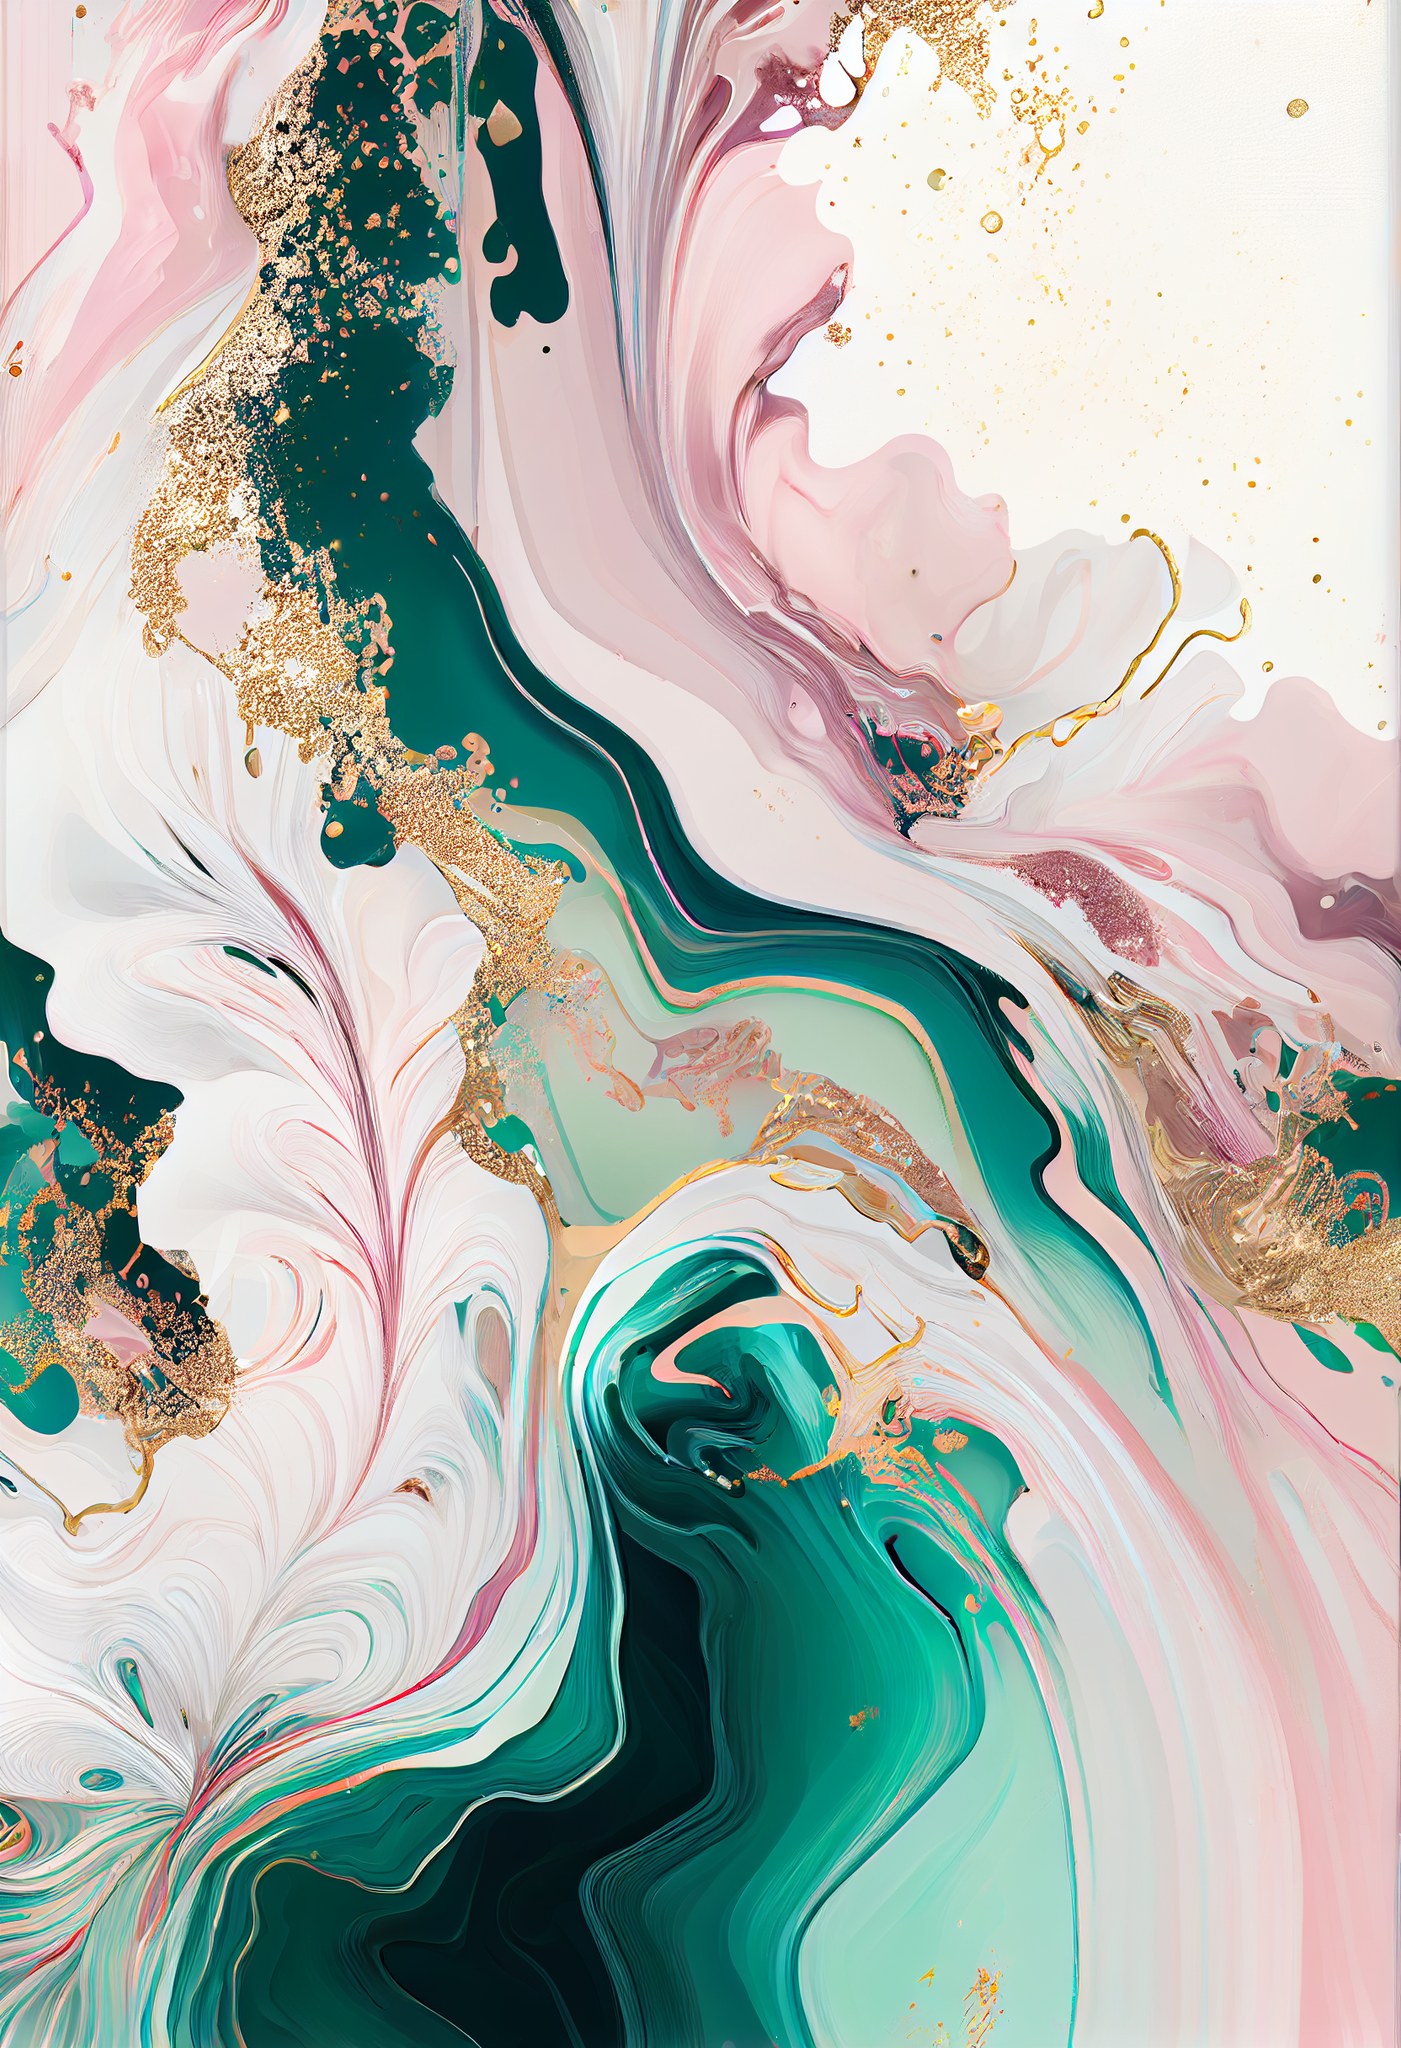 Fluid Harmony: A Mesmerizing Acrylic Color Print with Pink, Teal, and Golden Sparkle